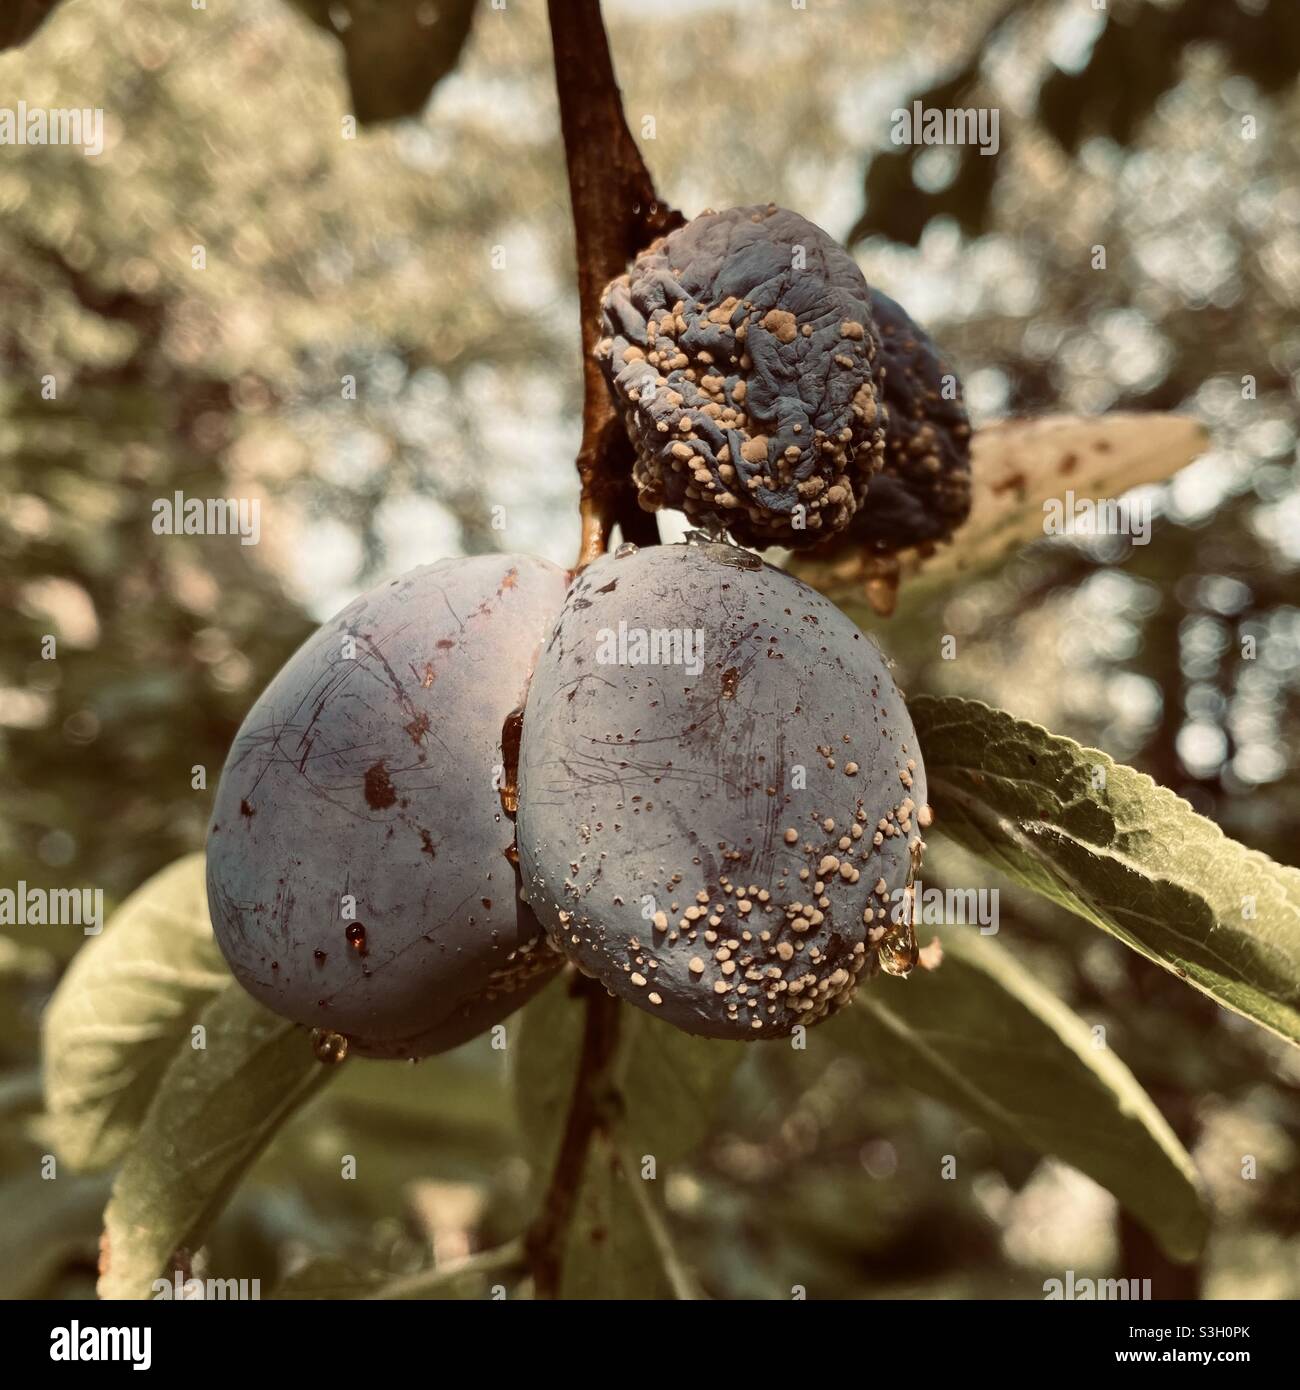 Rotting plums Stock Photo